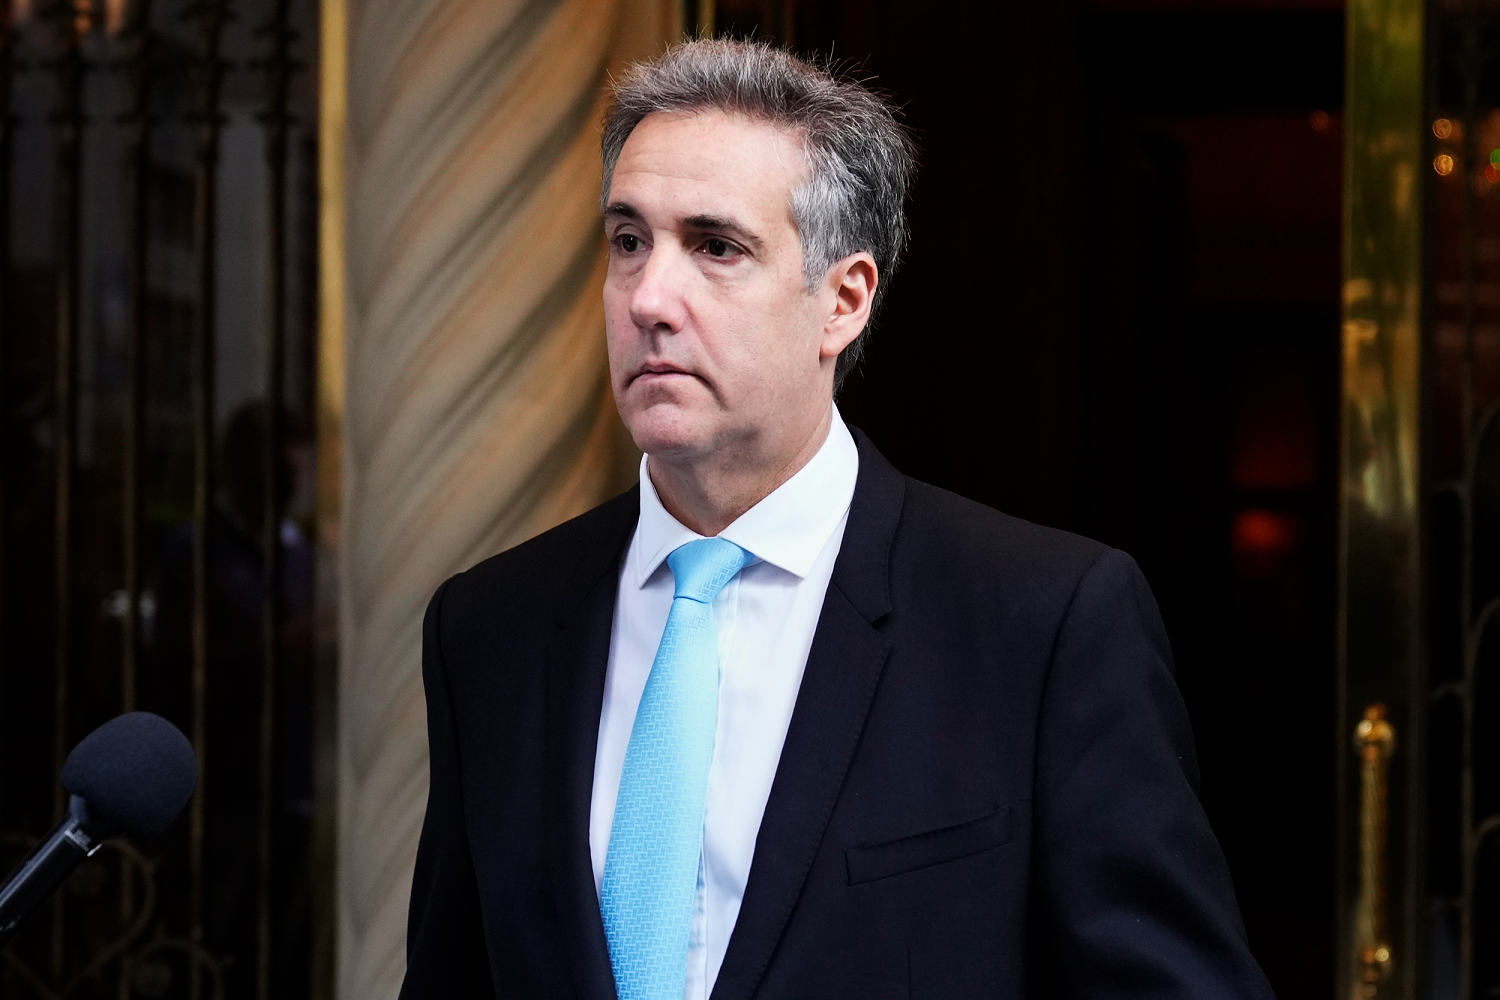 'Was it a lie?': Michael Cohen faces tense questioning on Day 17 of Trump's hush money trial